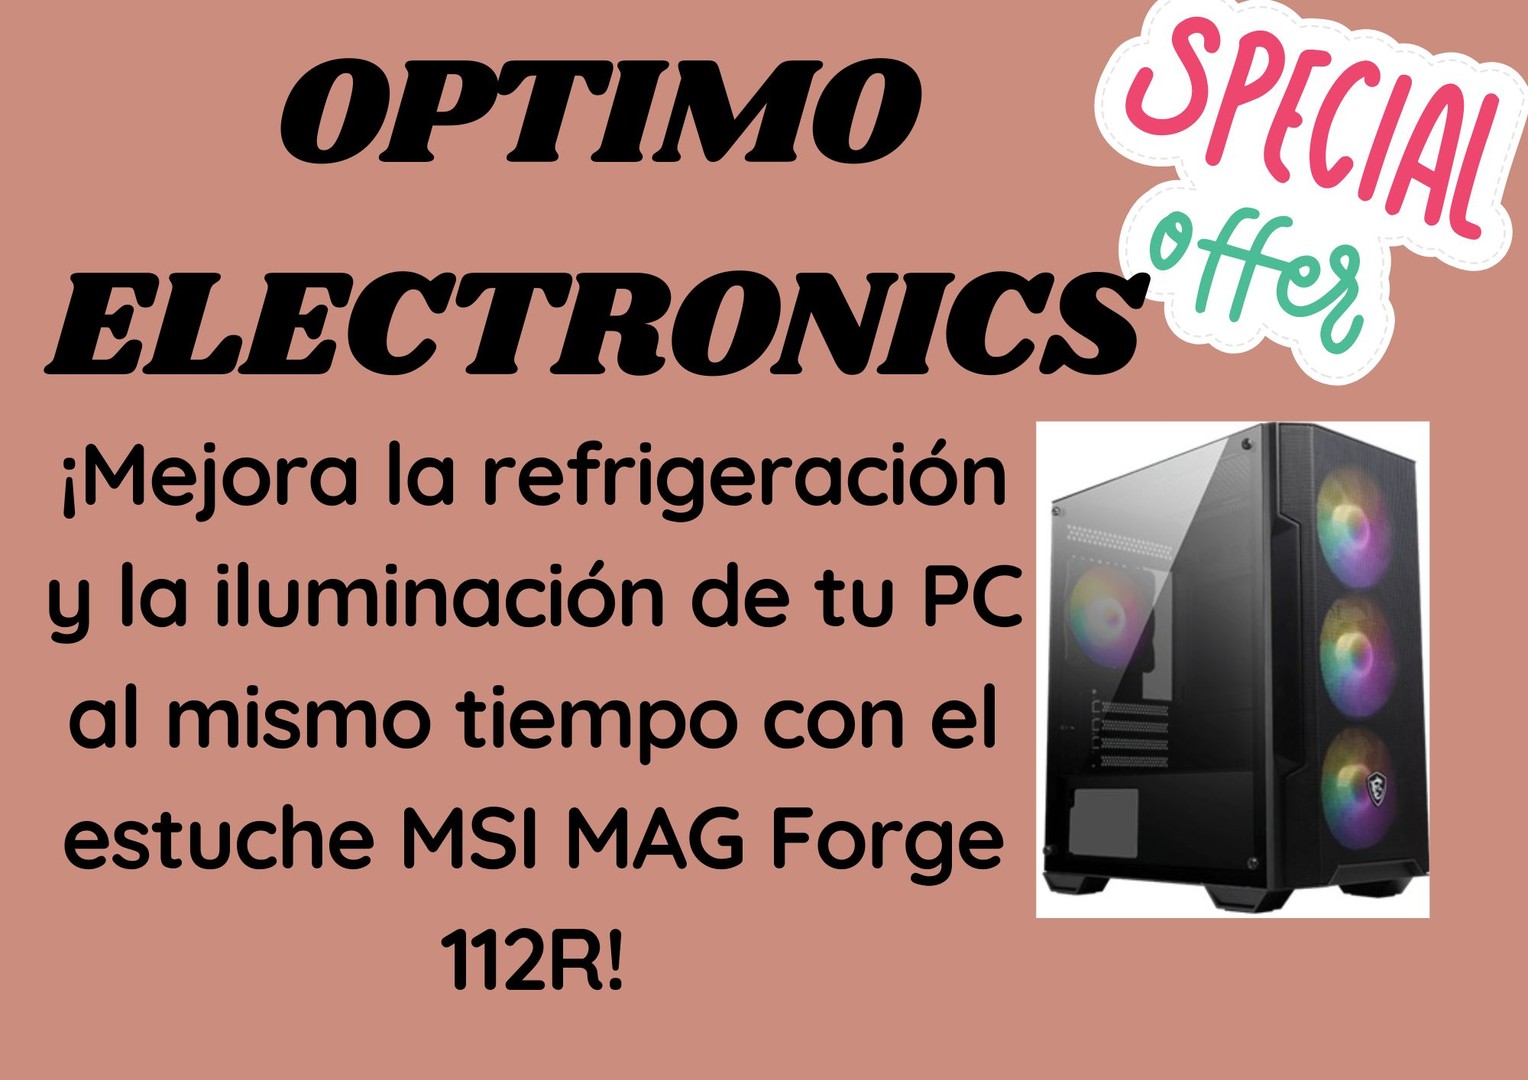 otros electronicos - CASE MSI MAG FORGE 112R MID-TOWER,